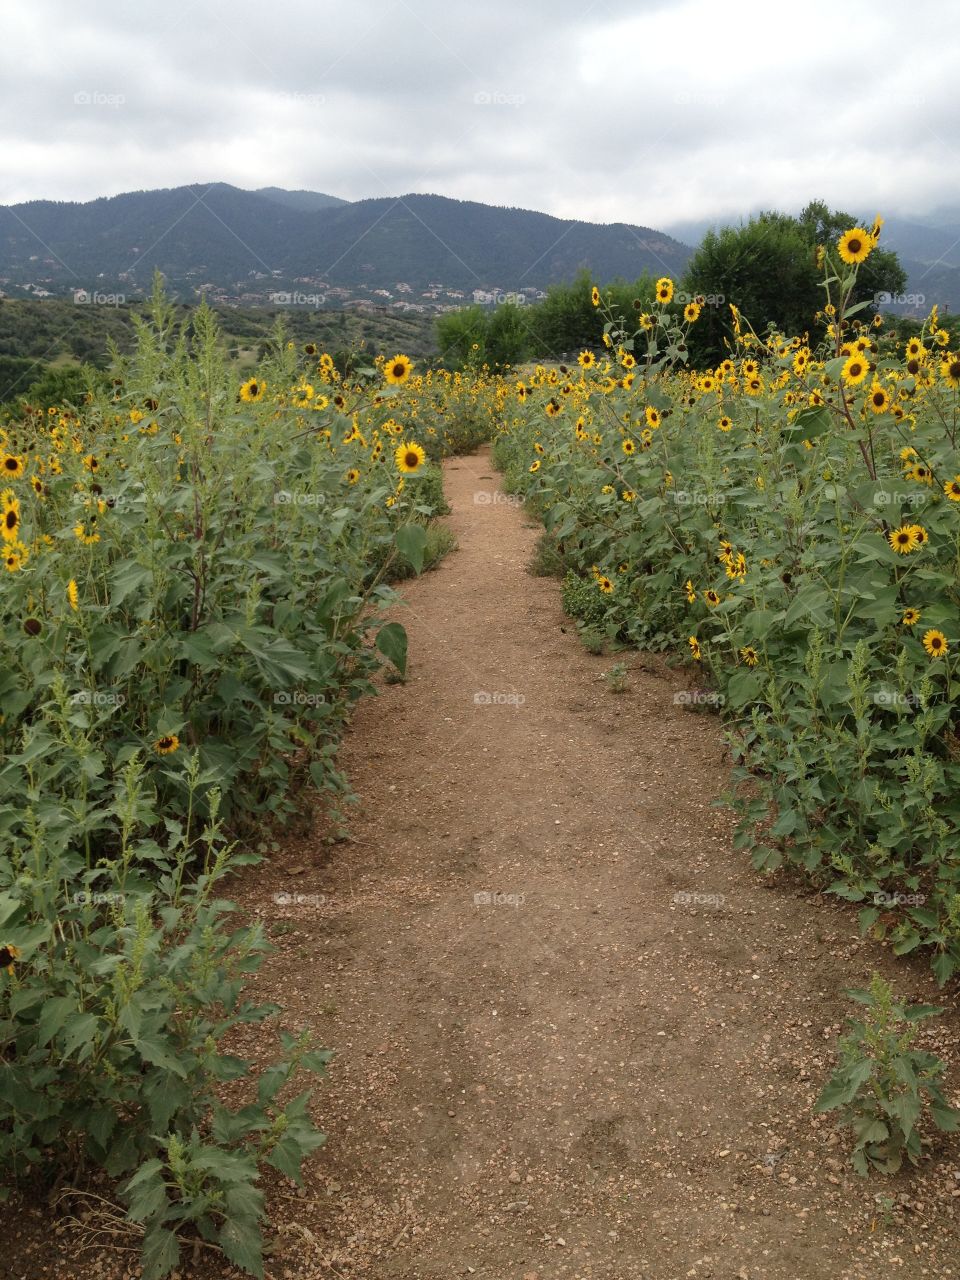 Sunflower Path. Happened along this lovely trail through the sunflowers at dog park!